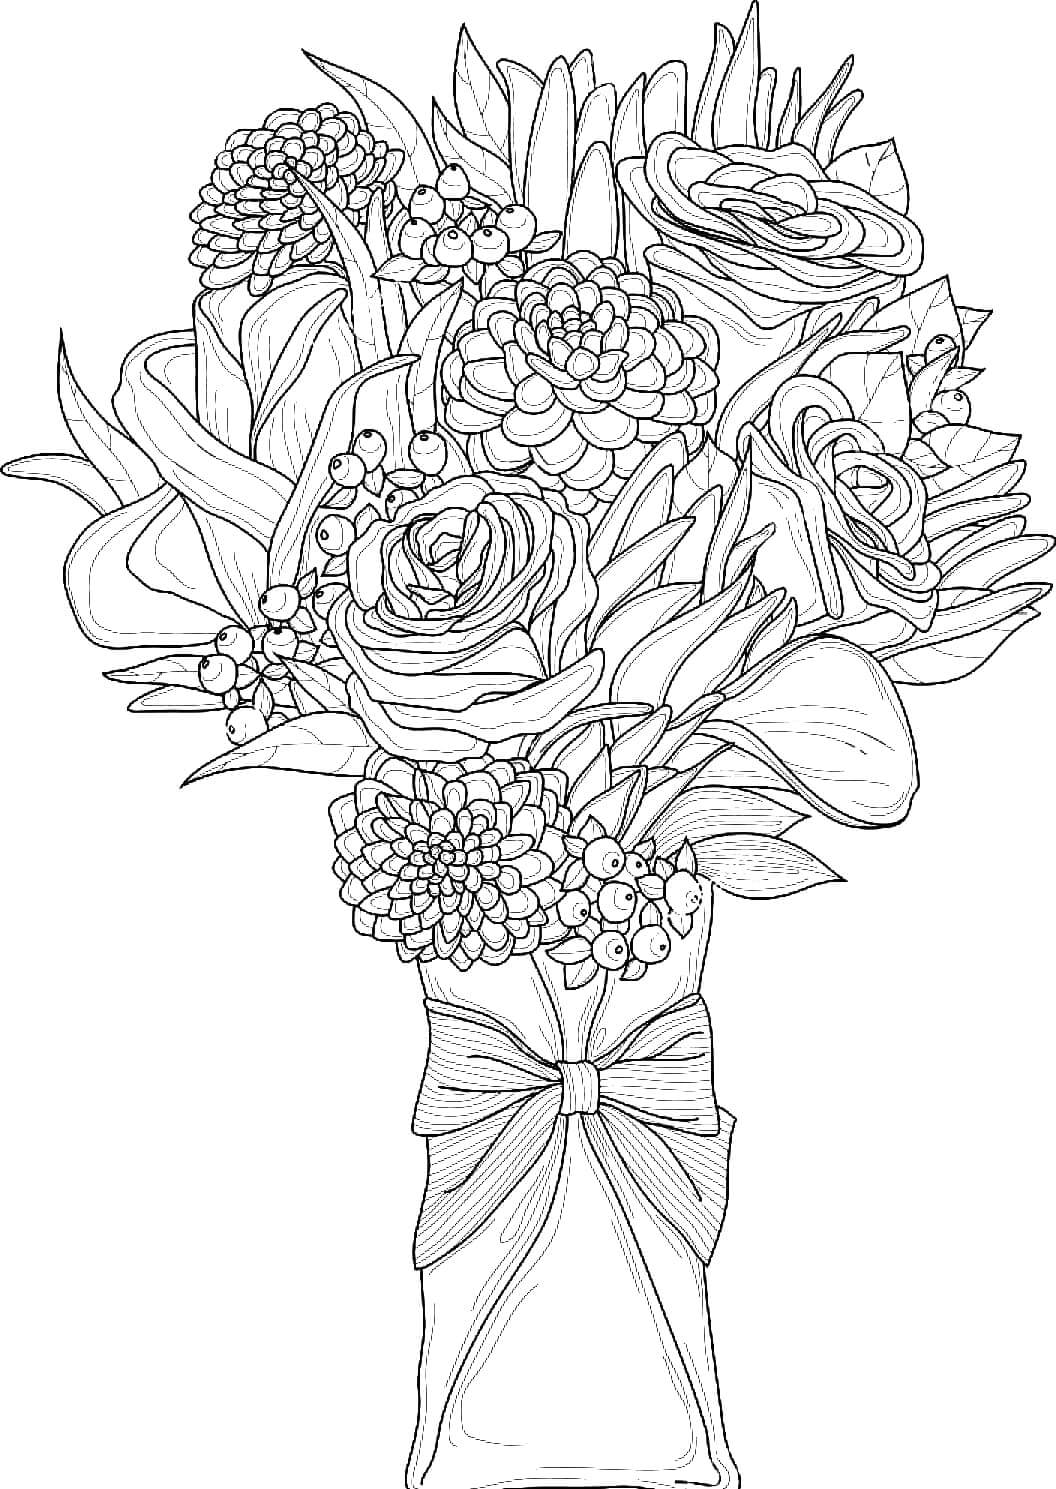 flower coloring pages printable | sunflower coloring pages for adults | flower coloring pages for adults pdf